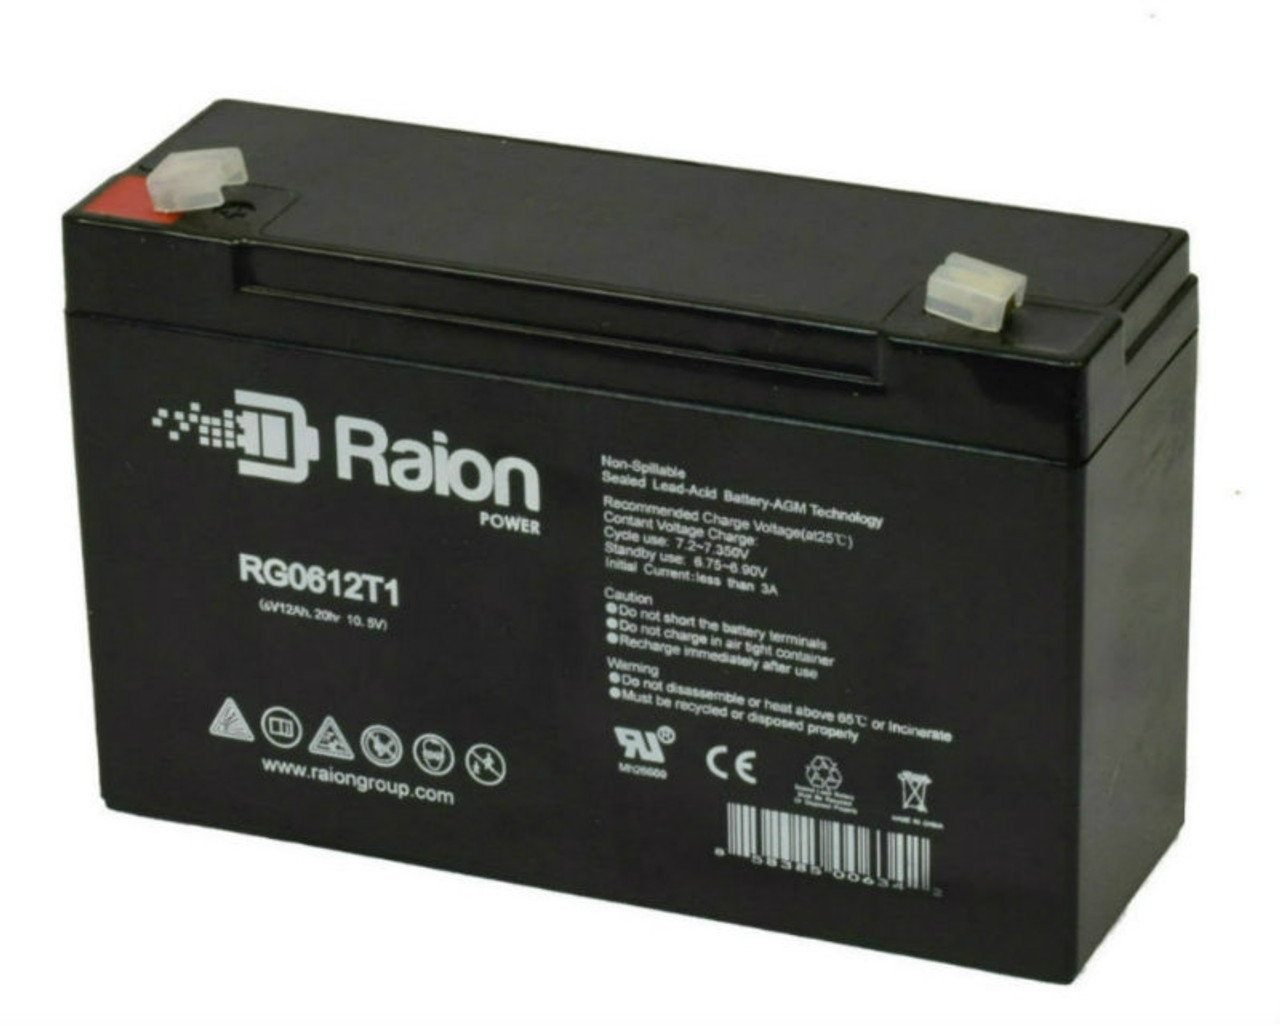 Raion Power RG06120T1 Replacement 6V 12Ah Emergency Light Battery for Sure-Lites XR5